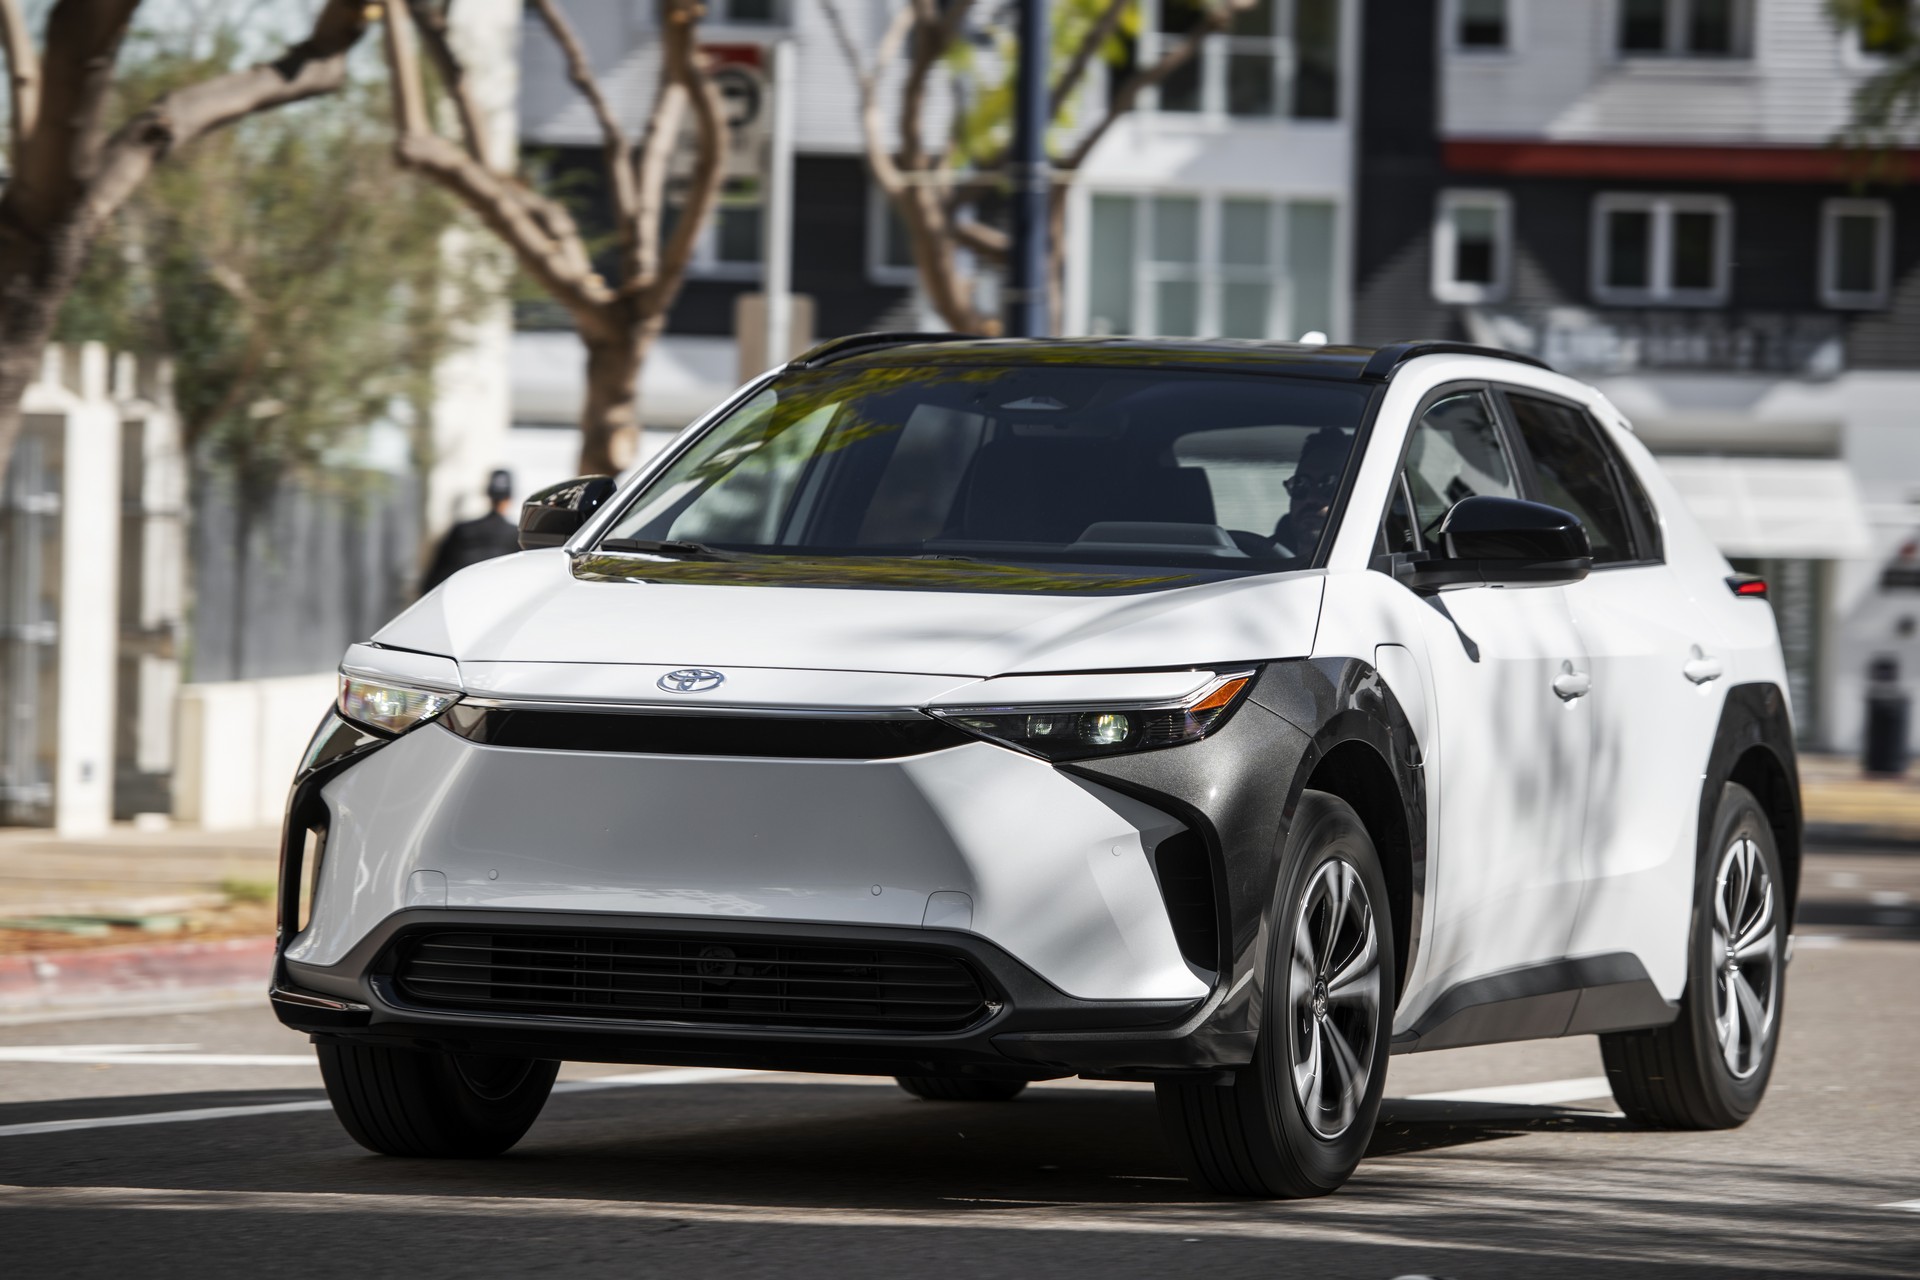 Toyota Says Data Proves EV-Only Policy Is Worse For The Planet